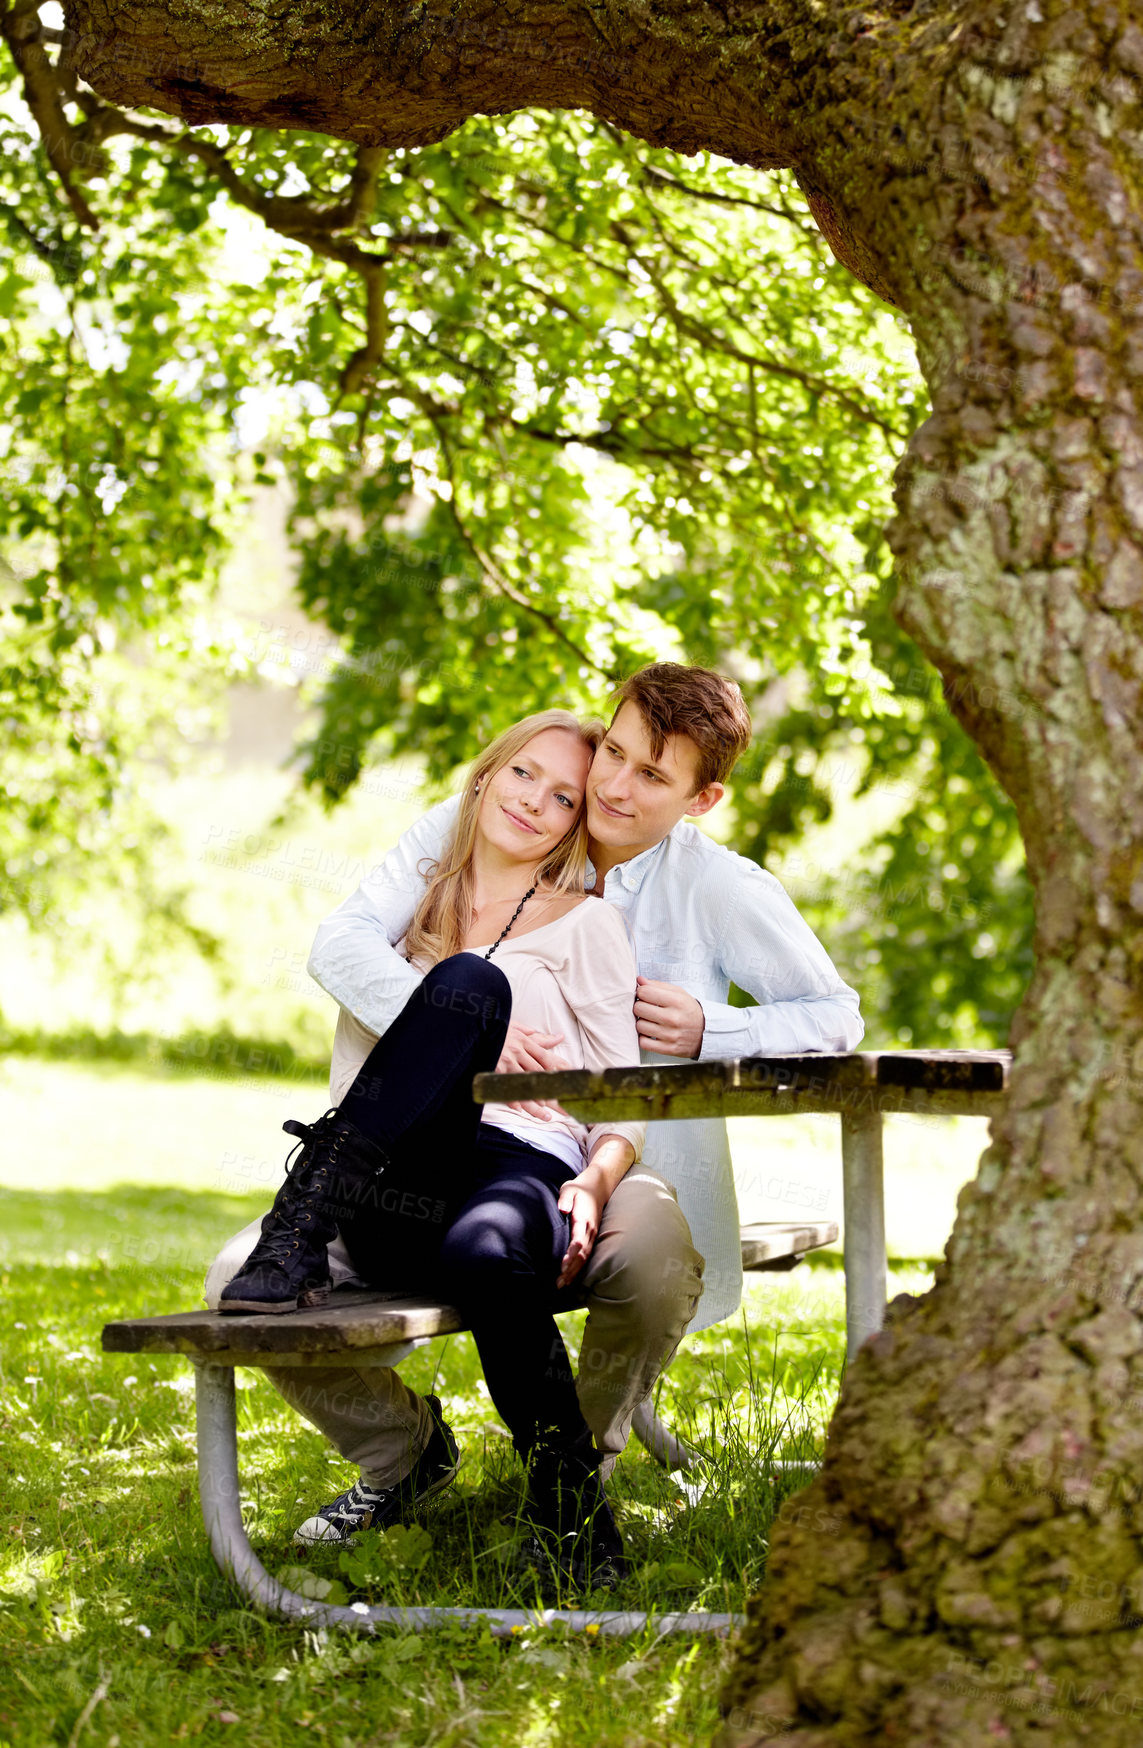 Buy stock photo Park, bench or happy couple hug, love and bonding in outdoor nature, green garden or romantic date. Summer sunshine, tree shade or relax boyfriend, girlfriend or partner embrace for relationship care